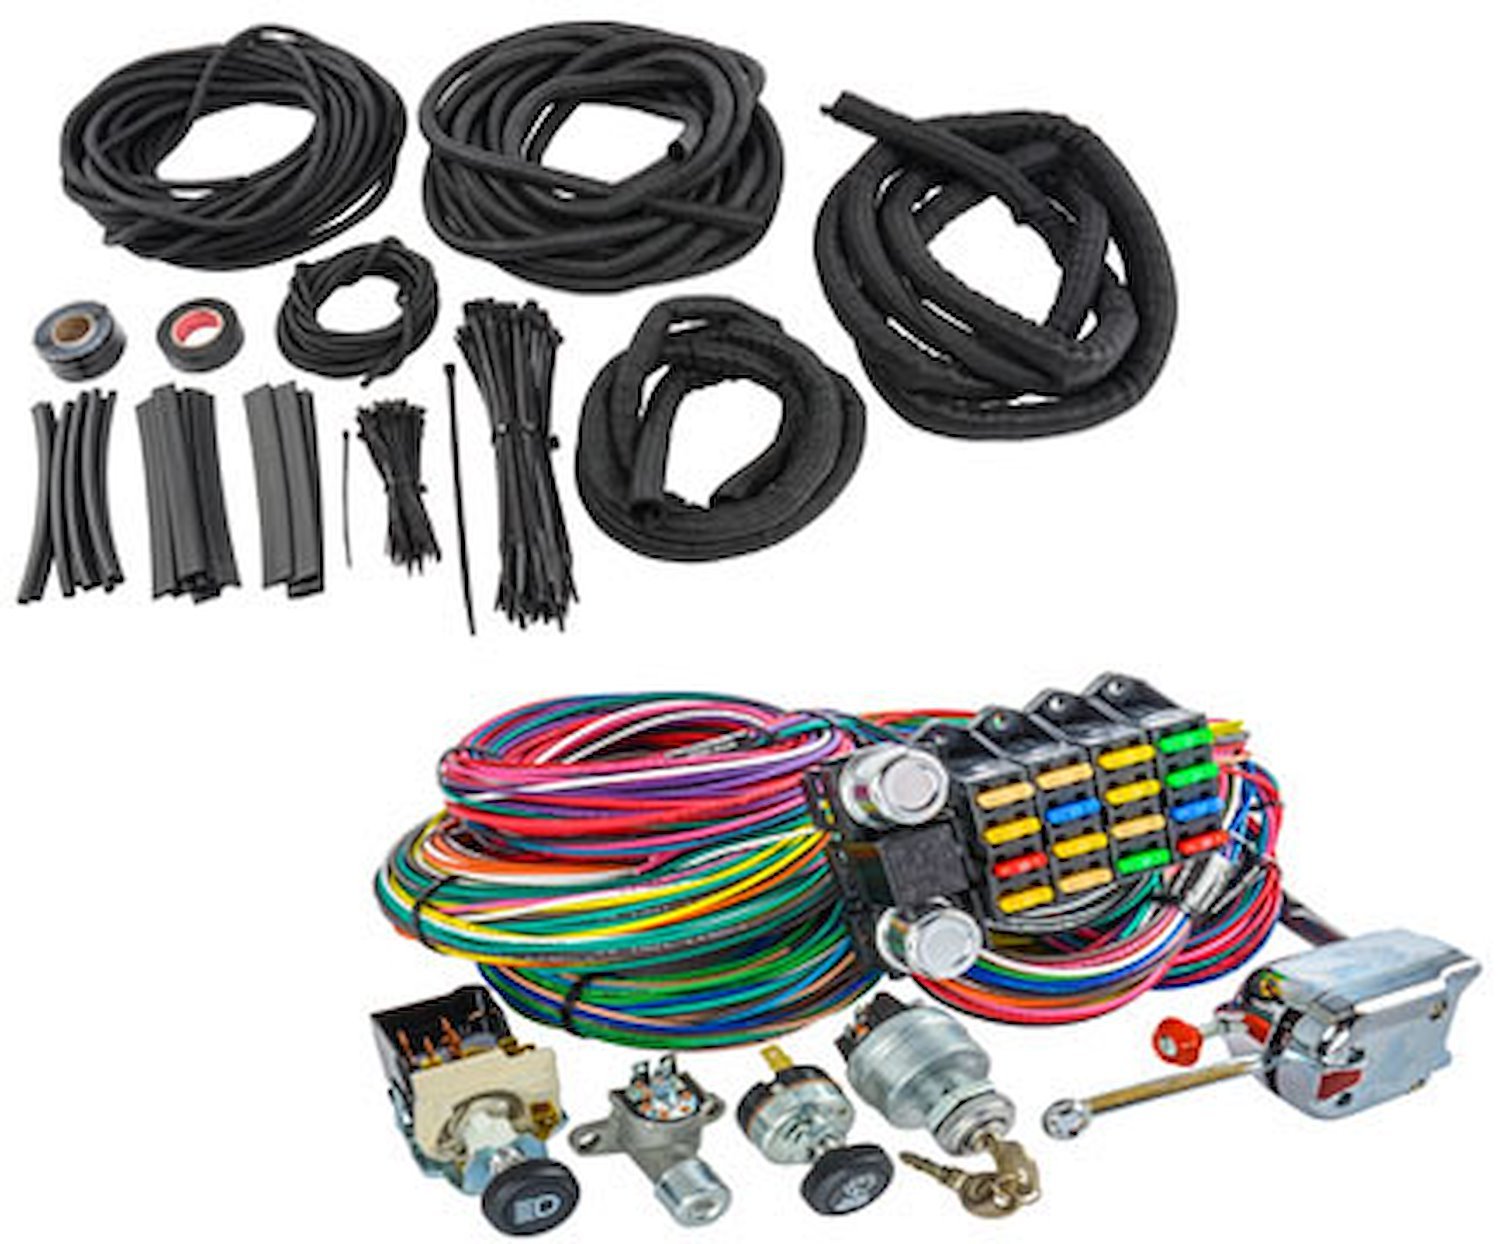 Universal Wiring Harness & Switch Kit with Woven